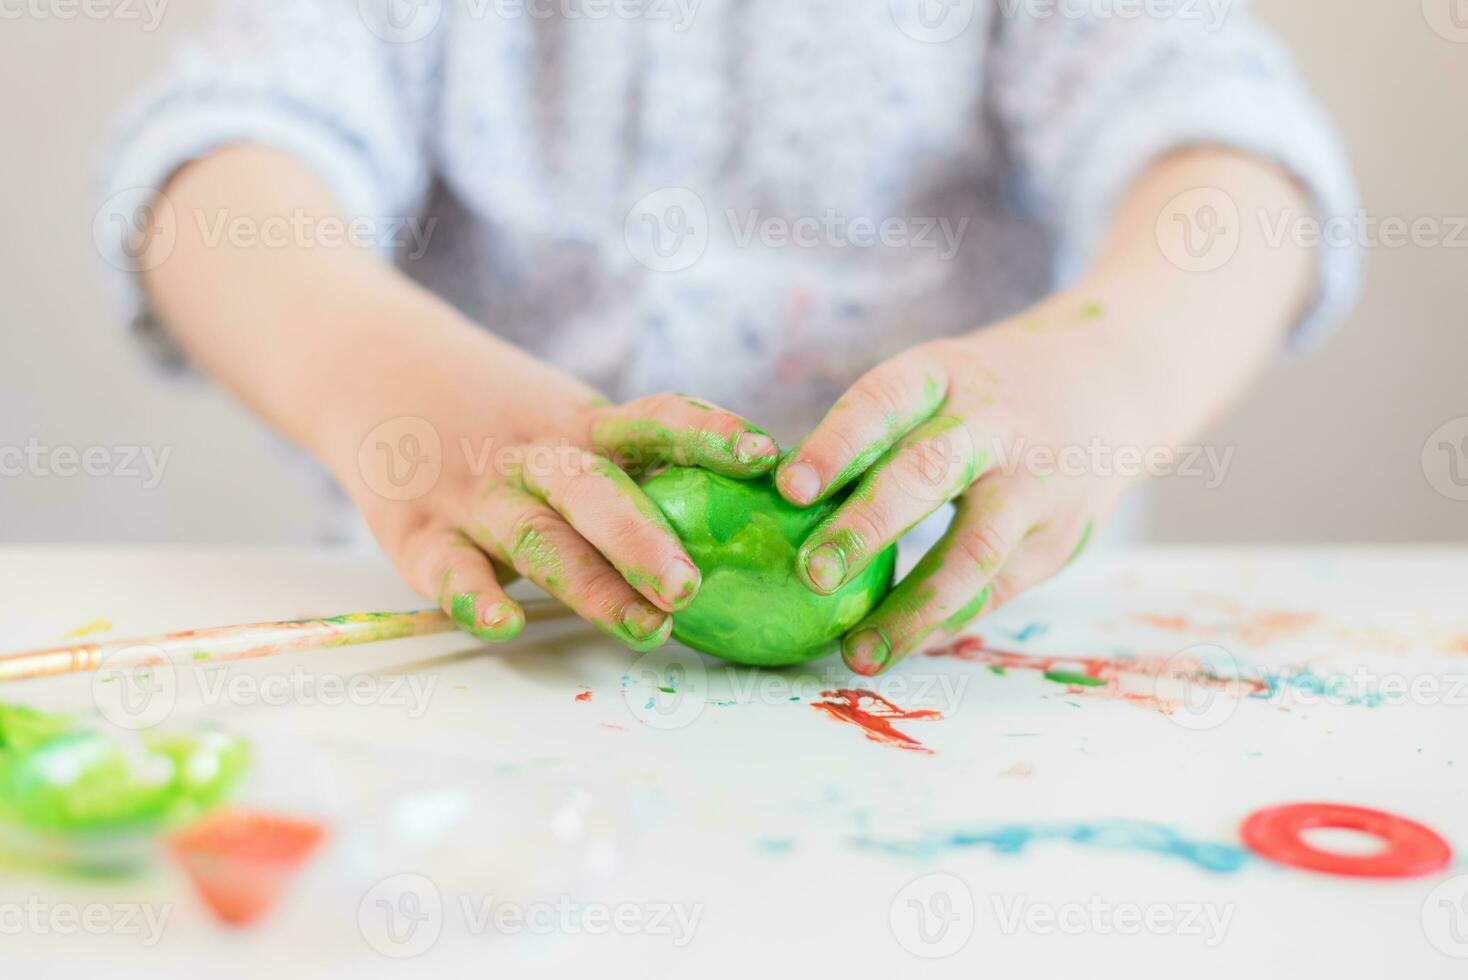 A child holds a green Easter egg in his hands stained with paint on a white table. photo